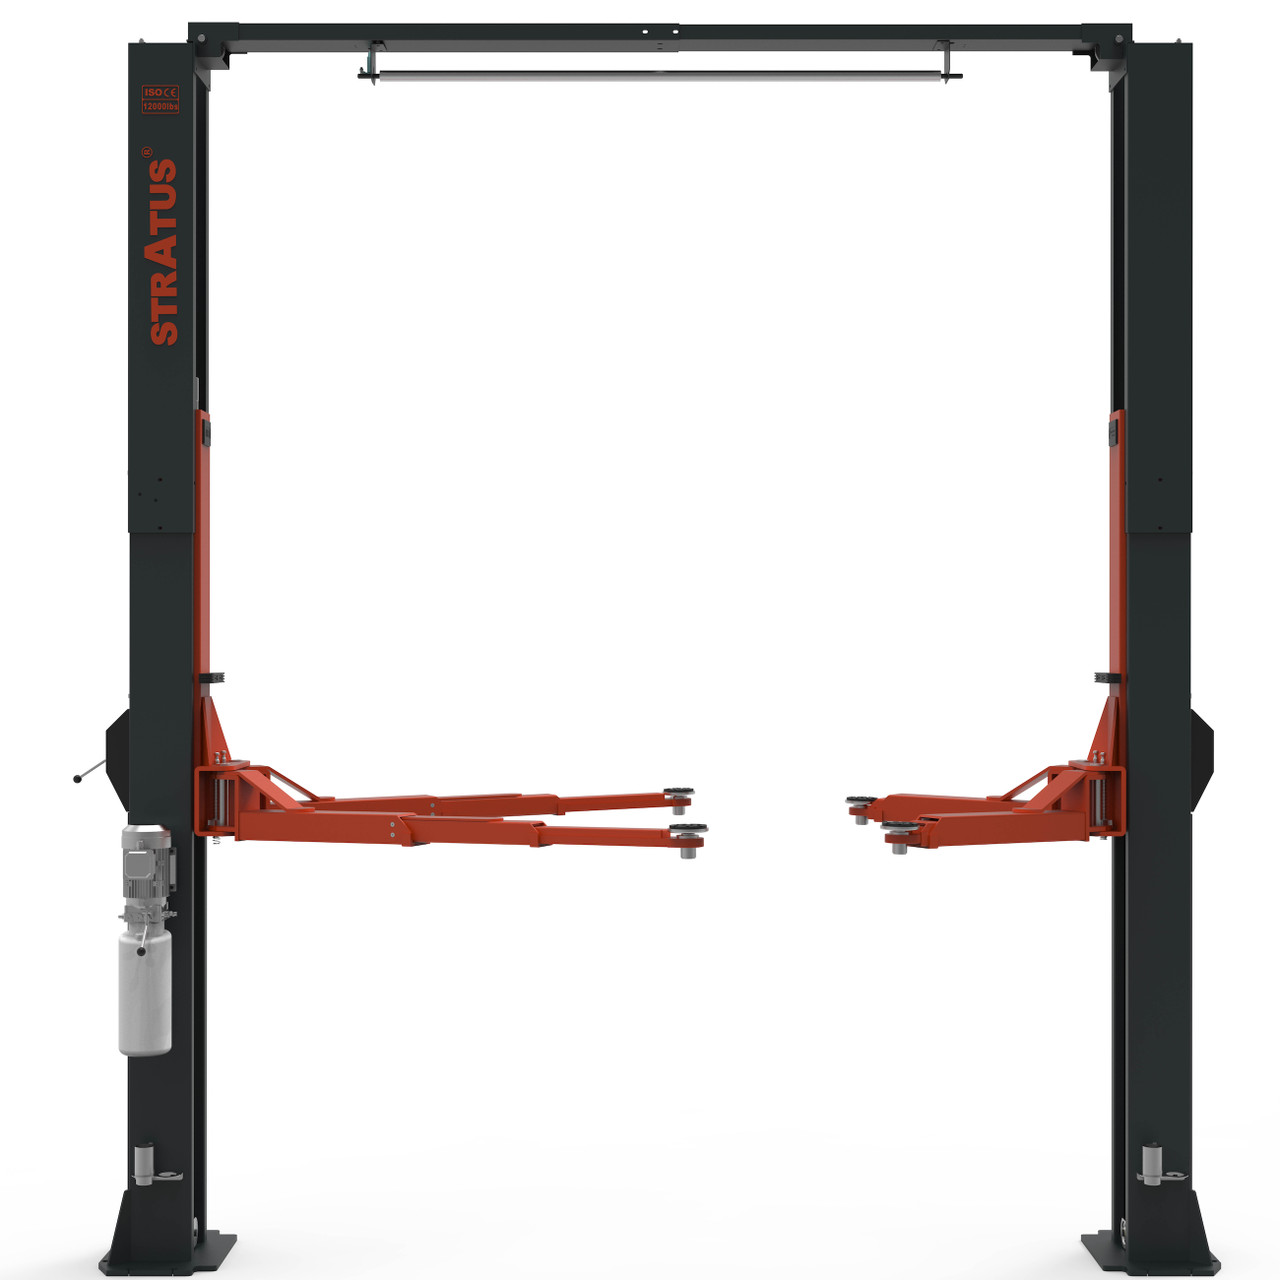 This sturdy 2 Post overhead car lift complements the impressive 12,000 LBS capacity to offer maximum reliability and safety. Its Clear Floor design further enhances the user’s experience, ensuring efficient operation without hindrances.